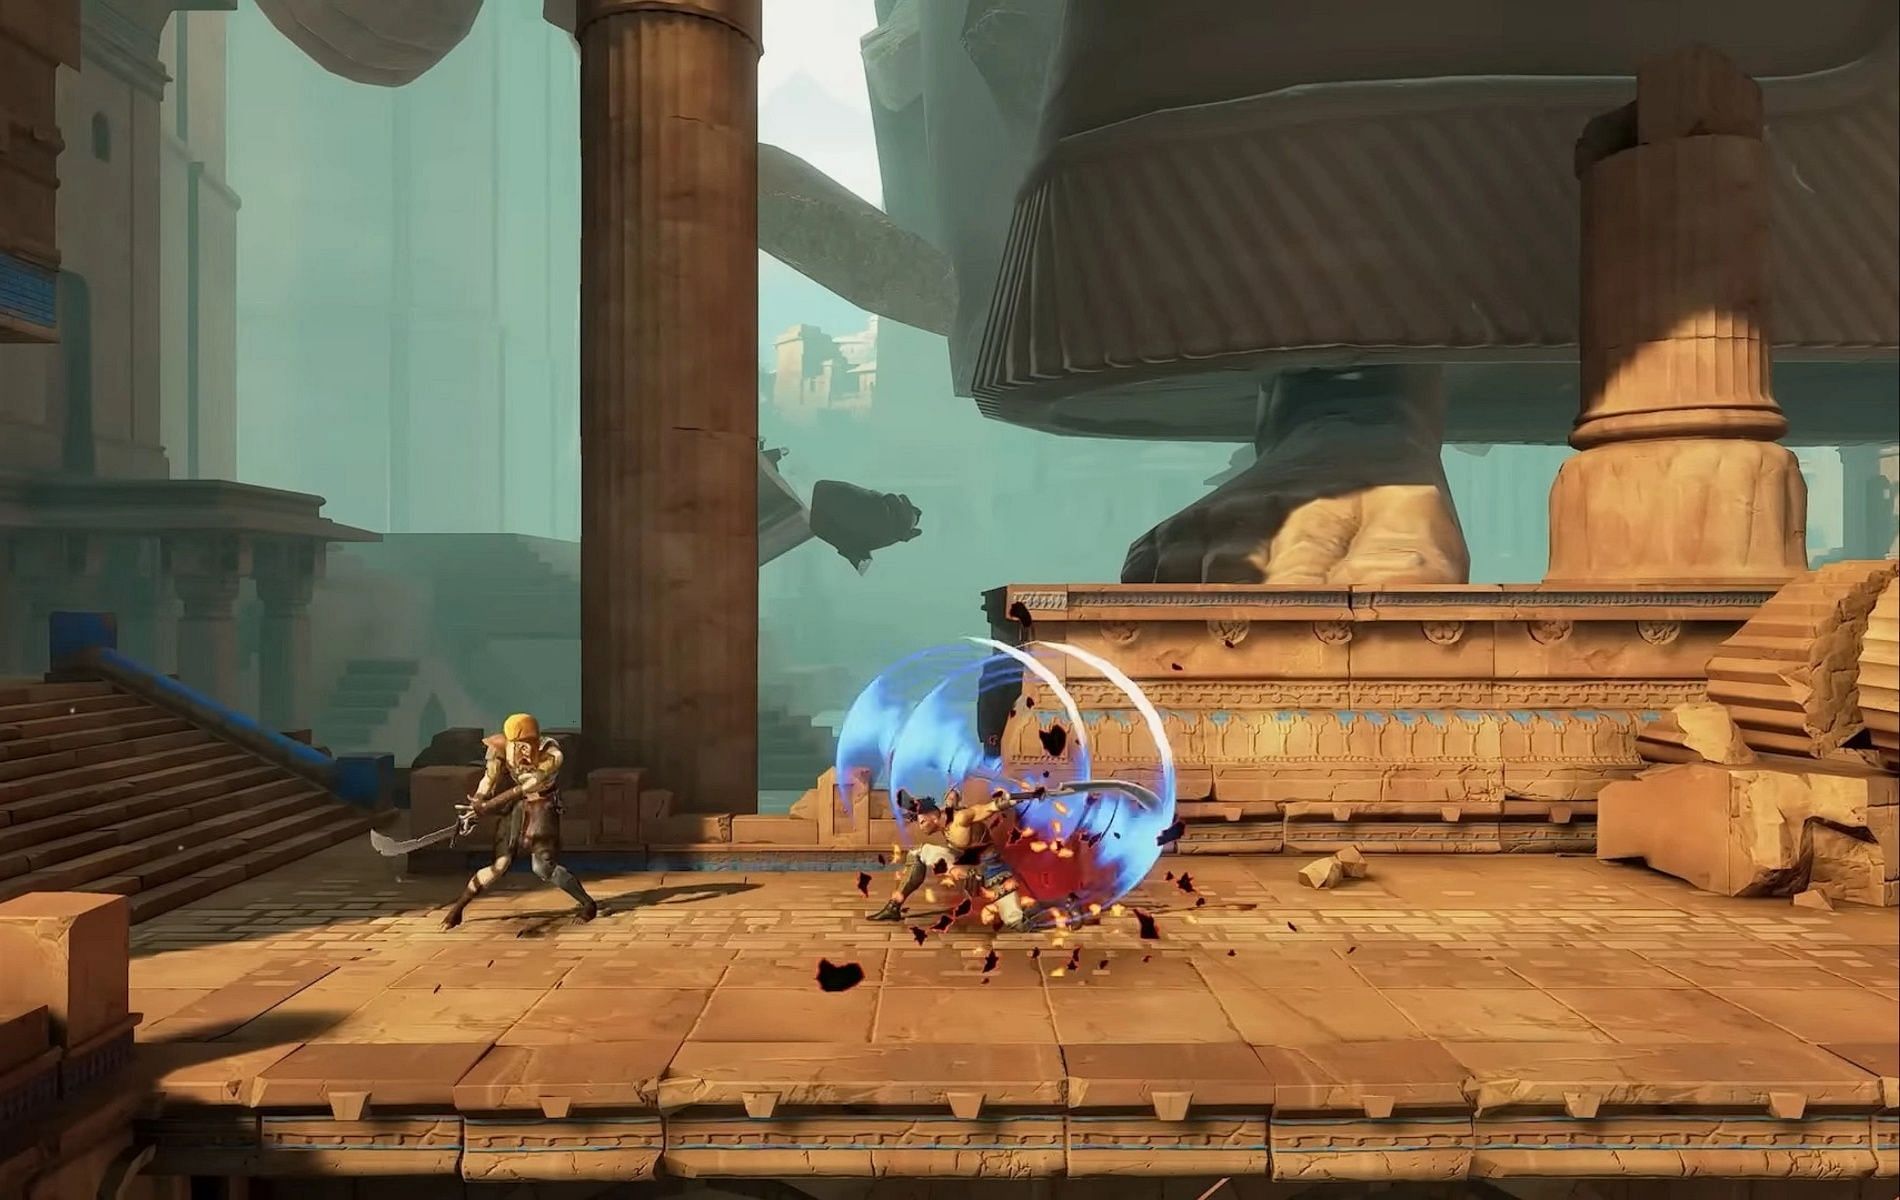 Prince of Persia: The Lost Crown brings the series back to 2D